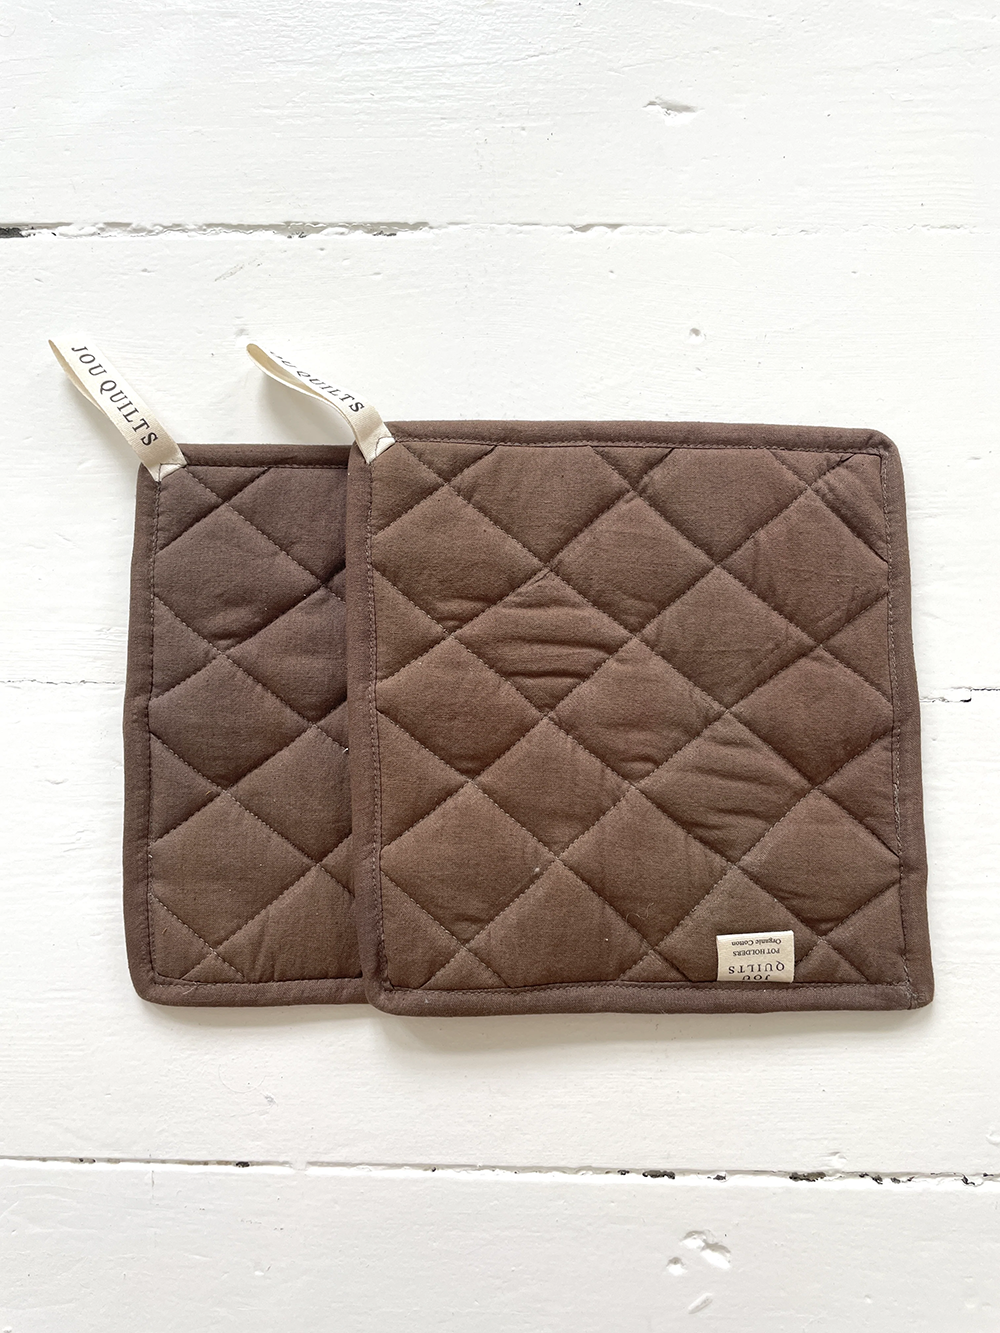 (JOU QUILTS) Quilted Patchwork Pot Holders - Brown & Lightblue